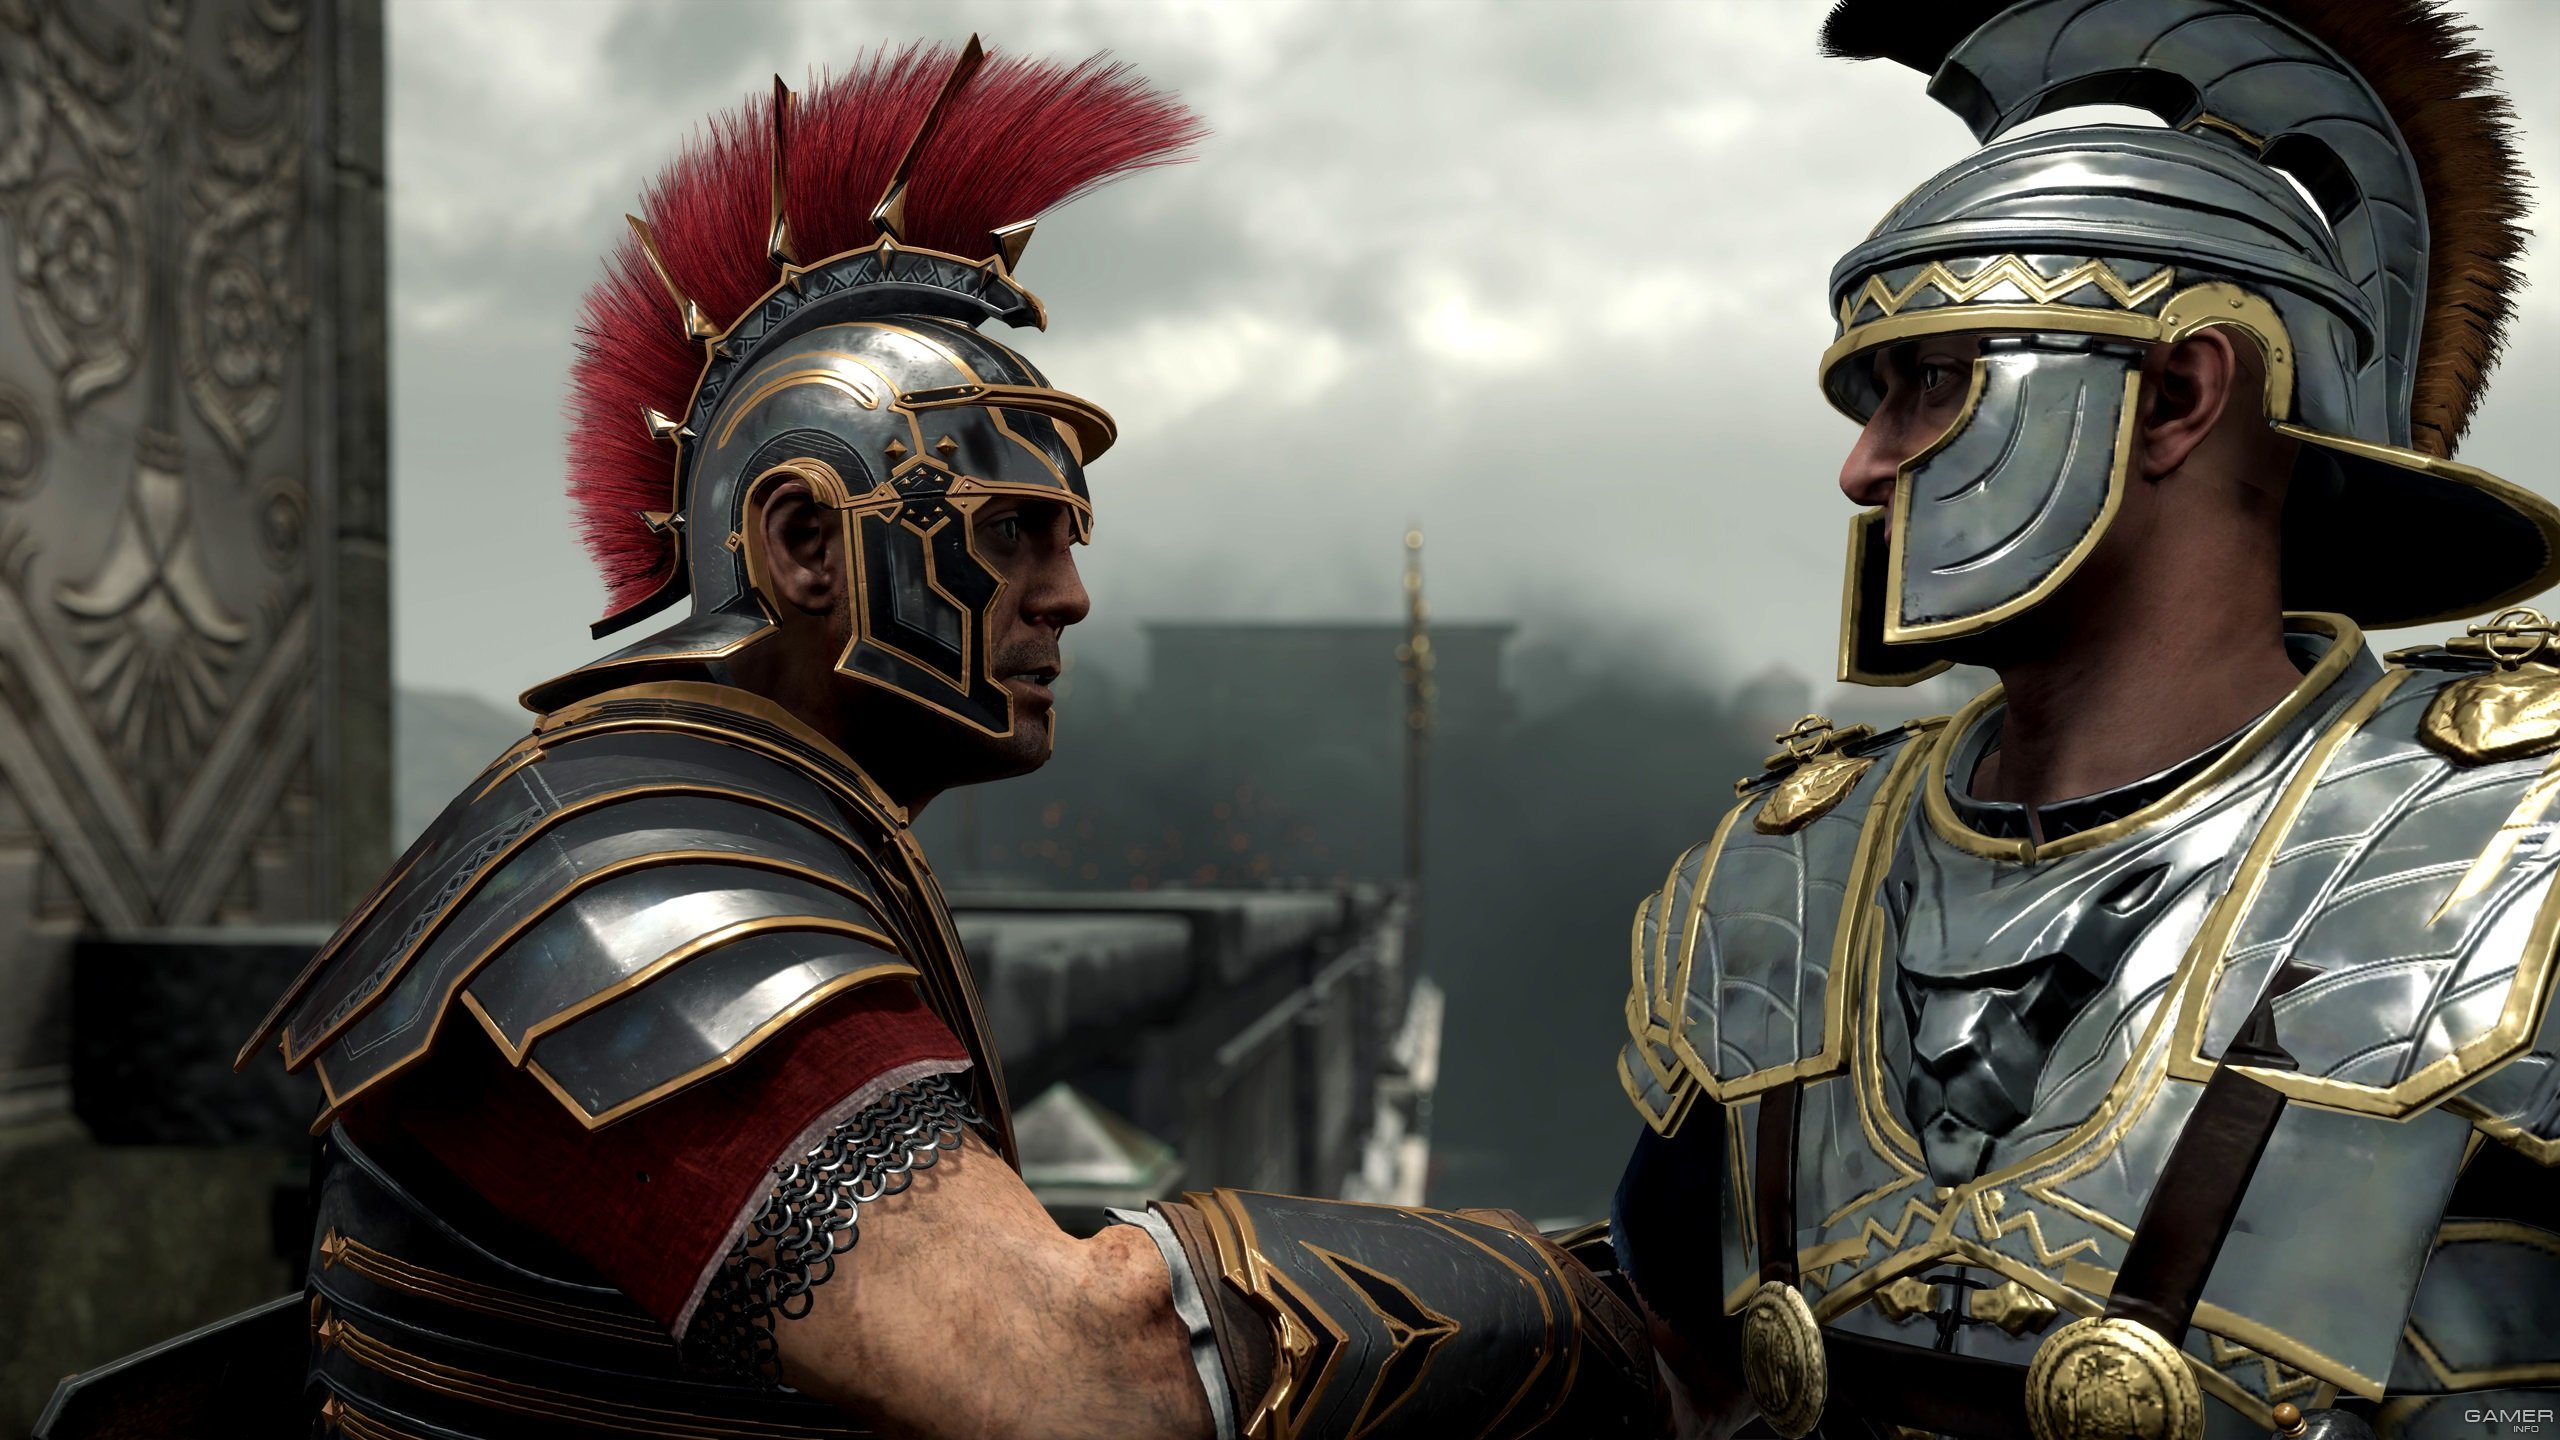 We arrived reached rome early in the. Ryse son of Rome Гладиатор. Ryse son of Rome Виталион. Римский легионер Центурион. Ryse son of Rome Xbox one.